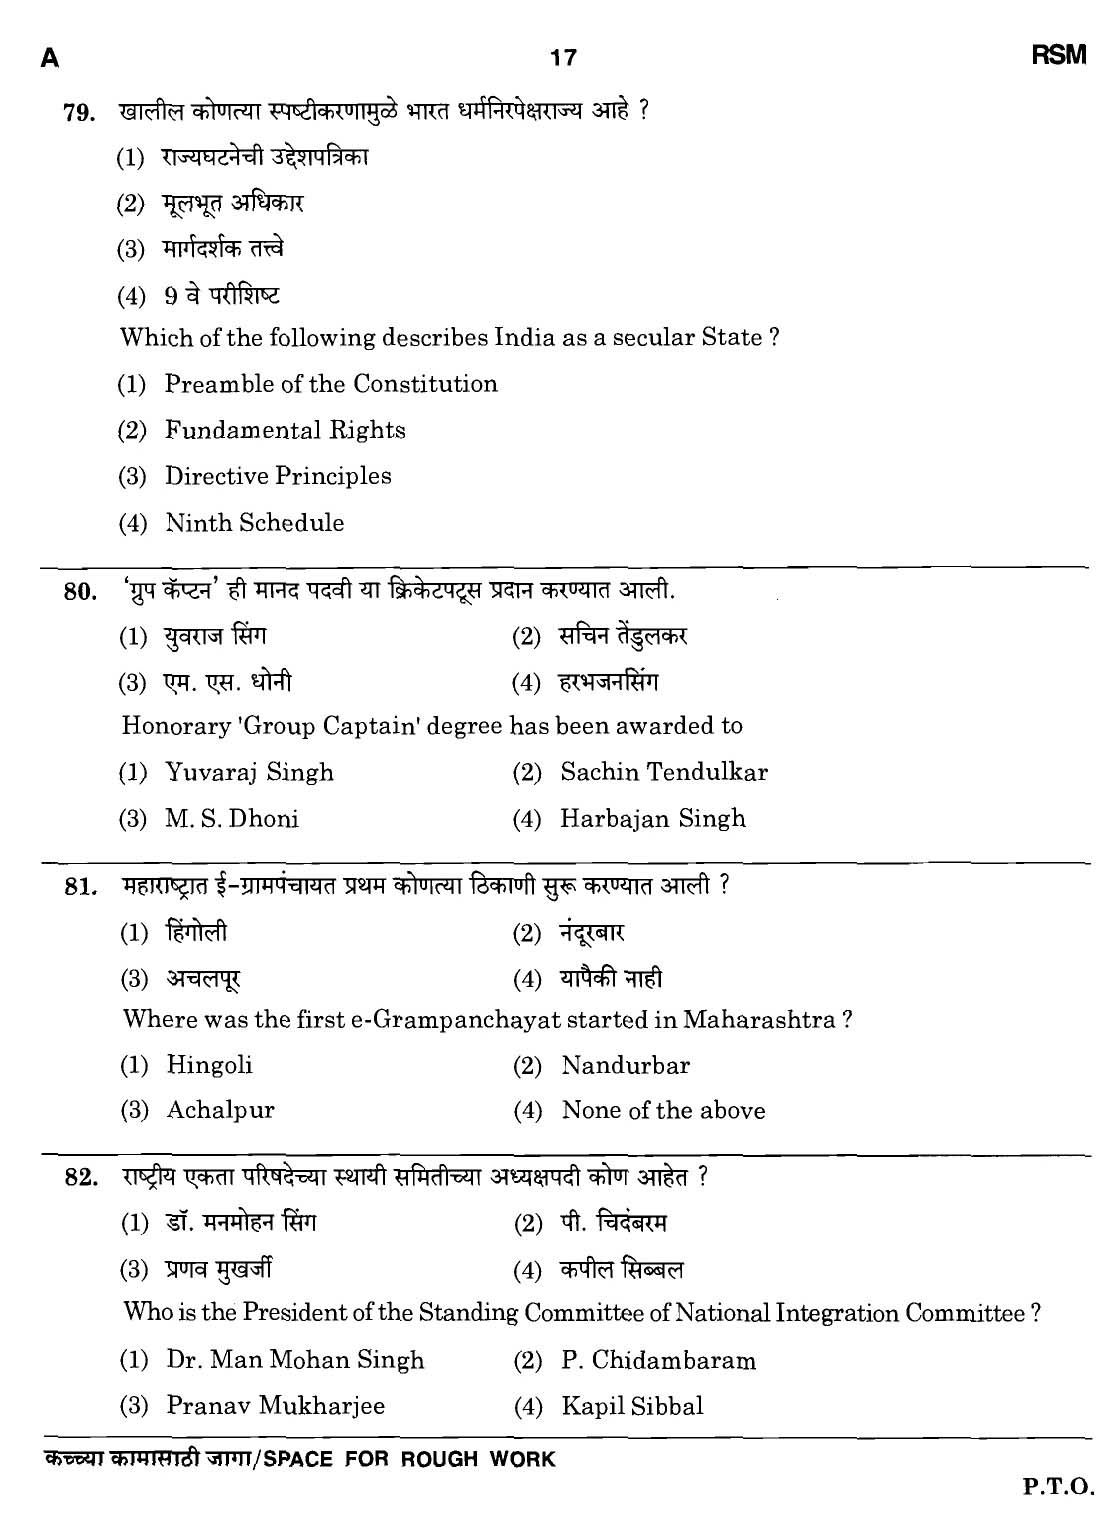 MPSC Agricultural Services Preliminary Exam 2011 Question Paper 16